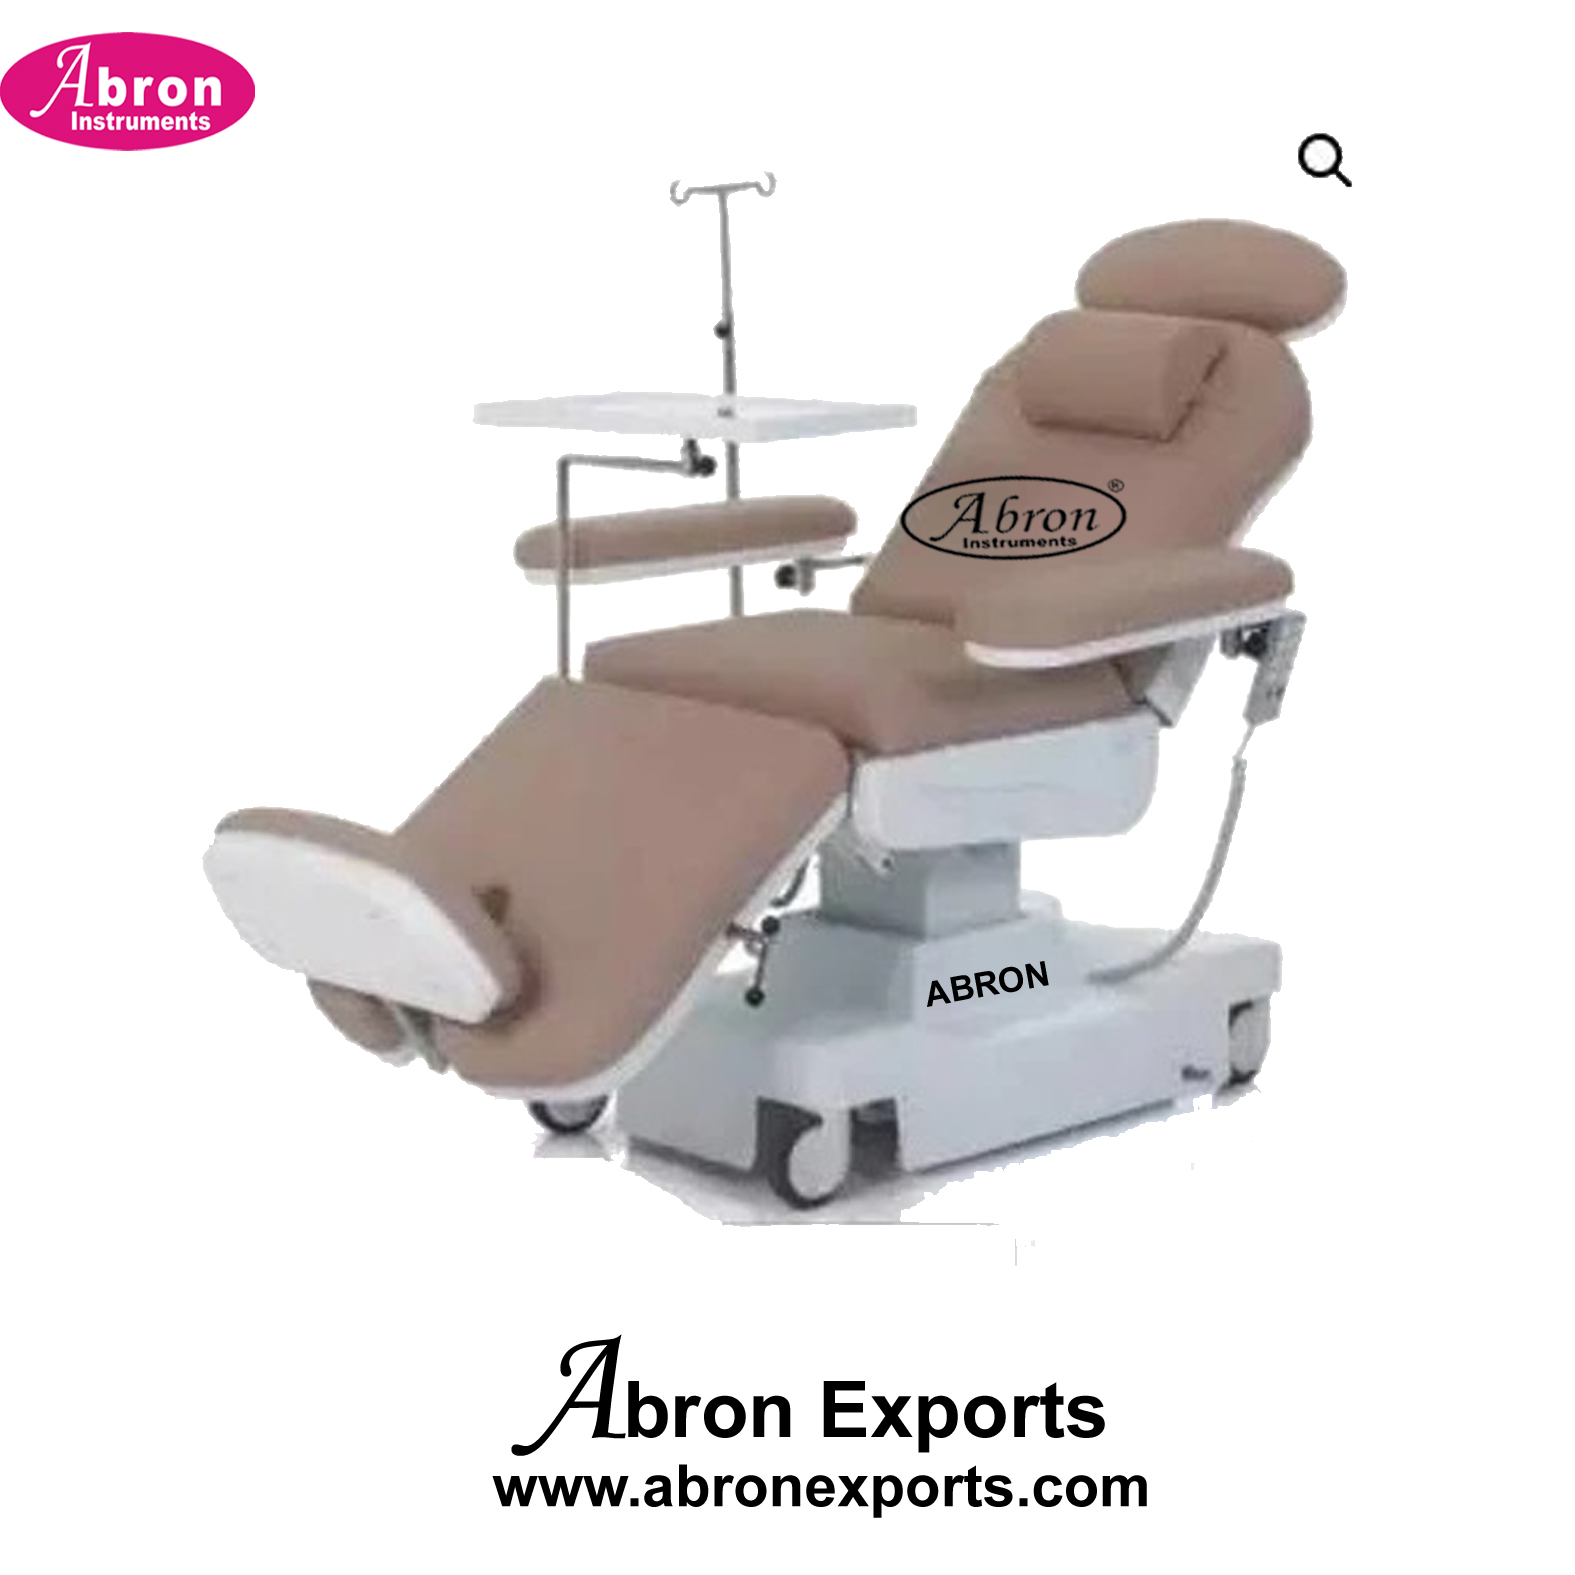 Dialysis Chair Electric Motorized with CPR Postion Furniture Hospital Abron ABM-2339M 